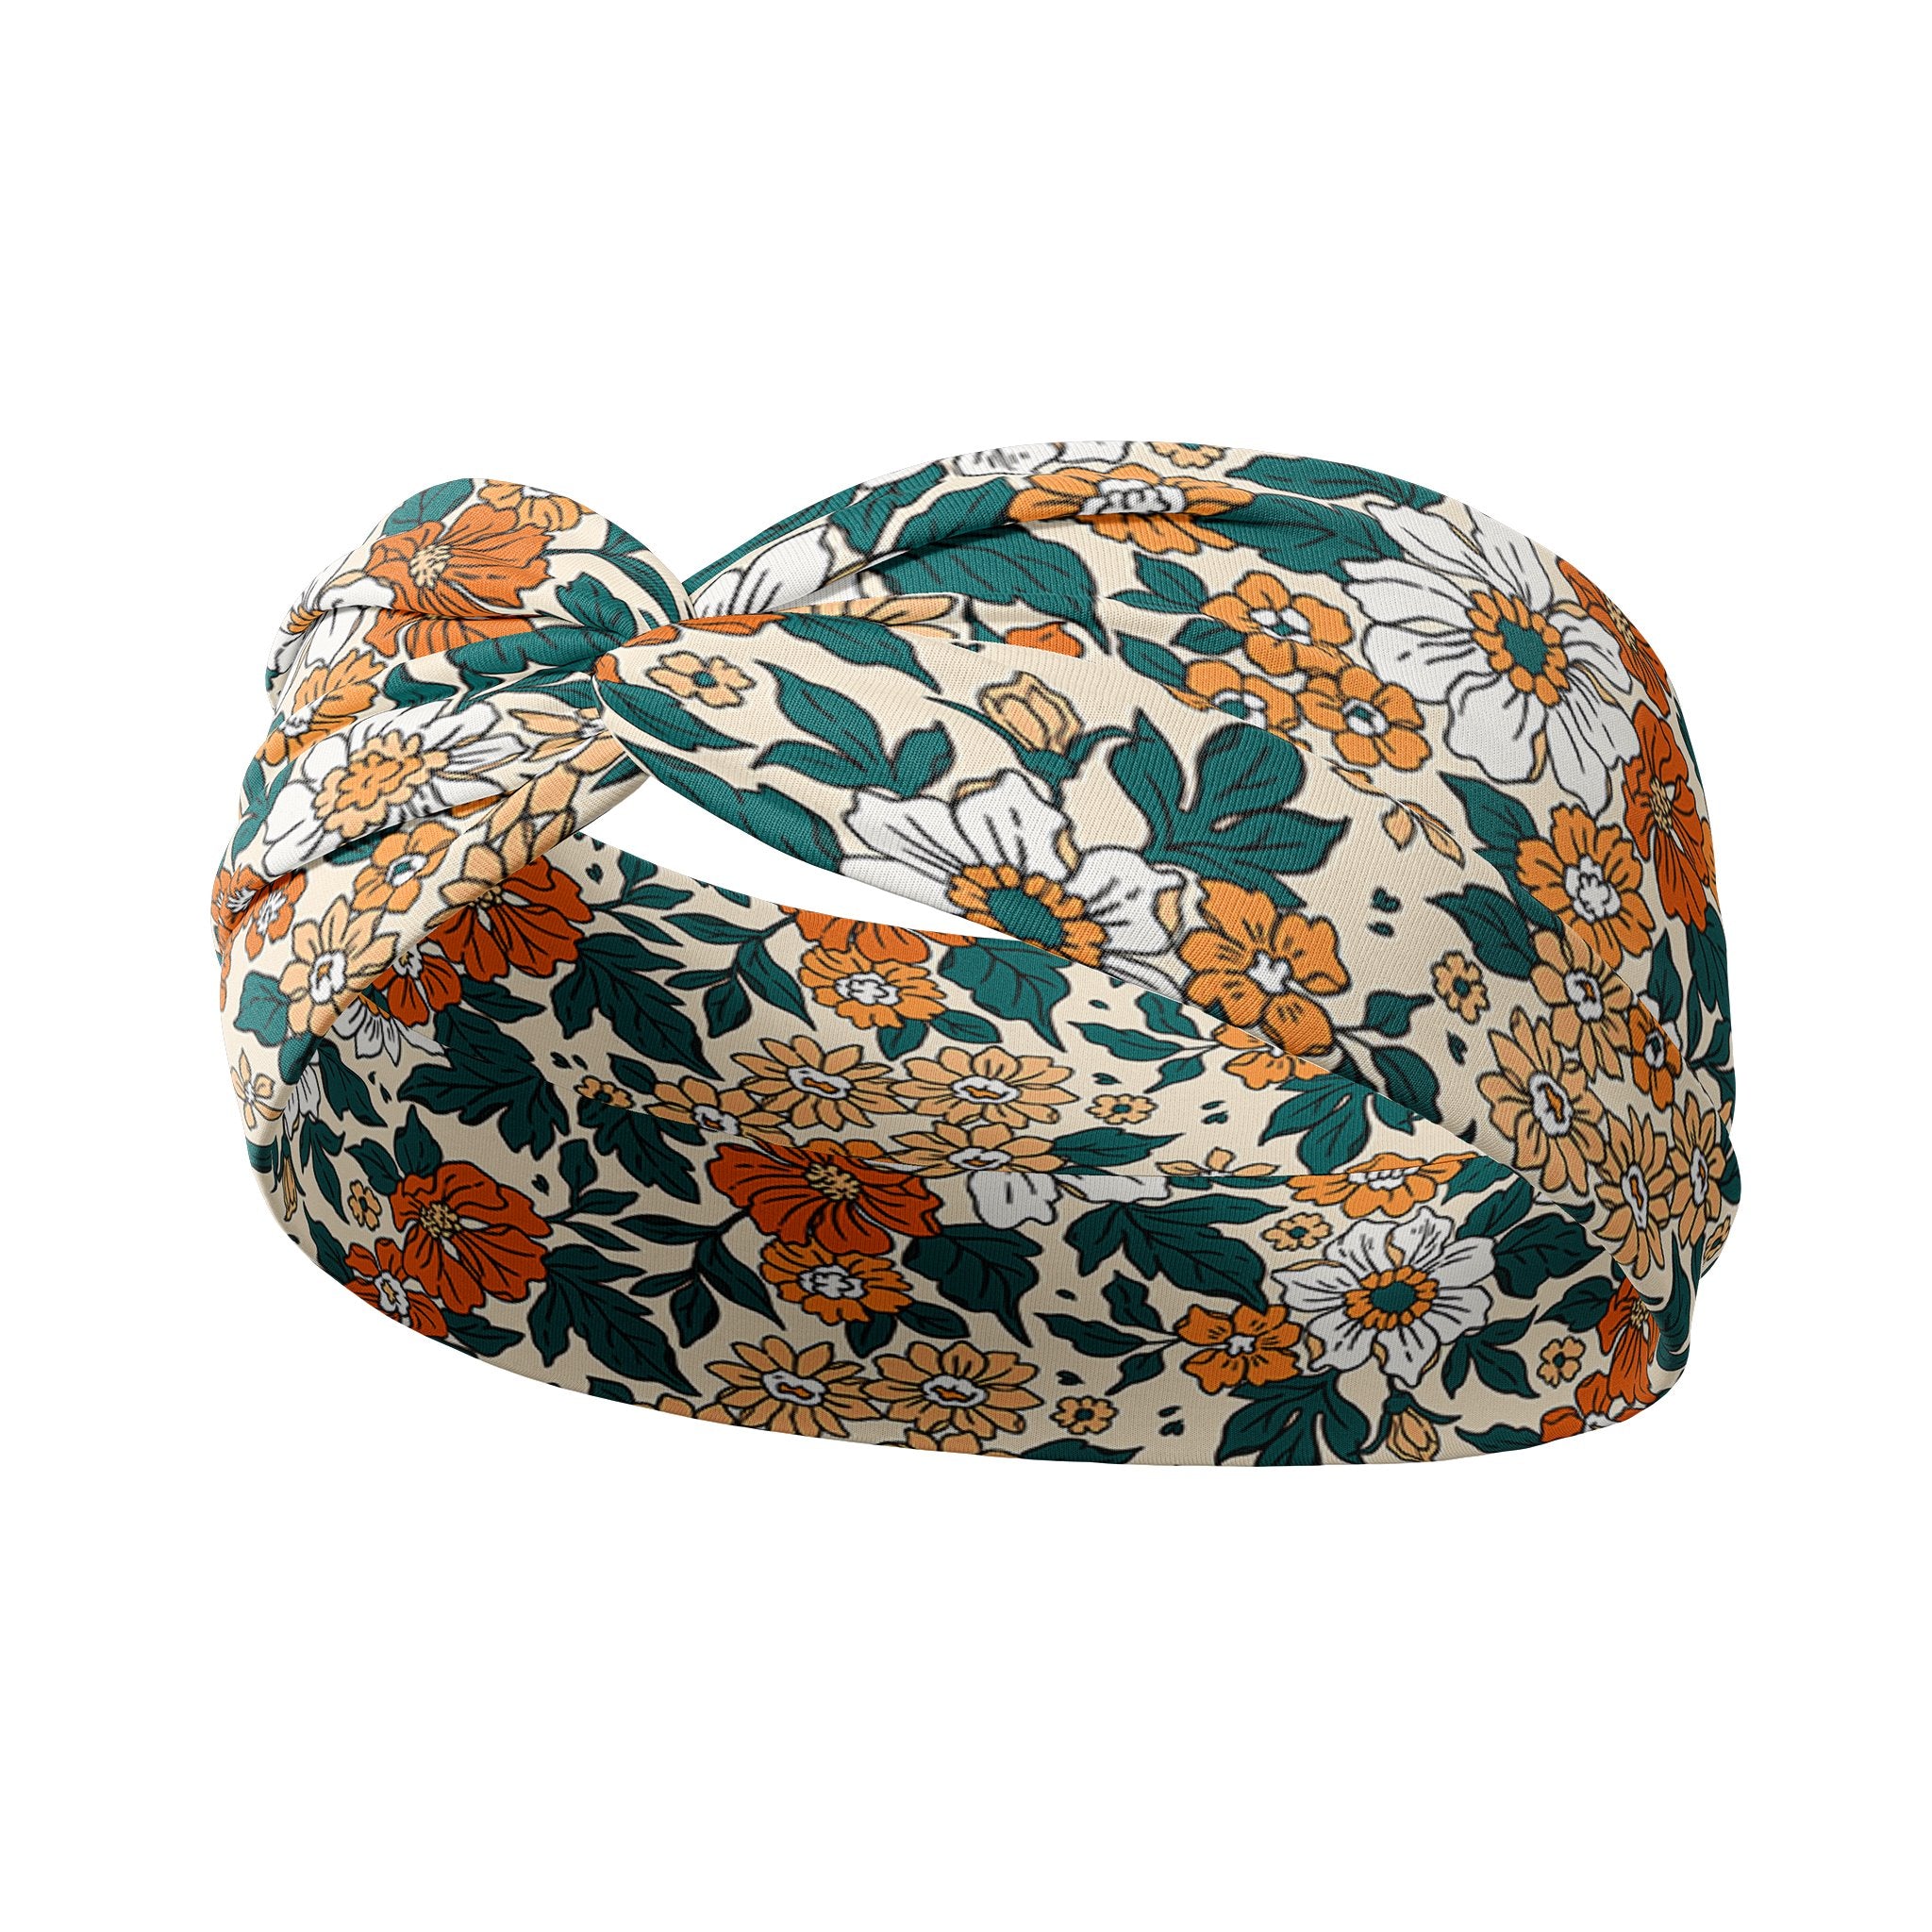 Adult women's beige headband with teal, orange and white floral print